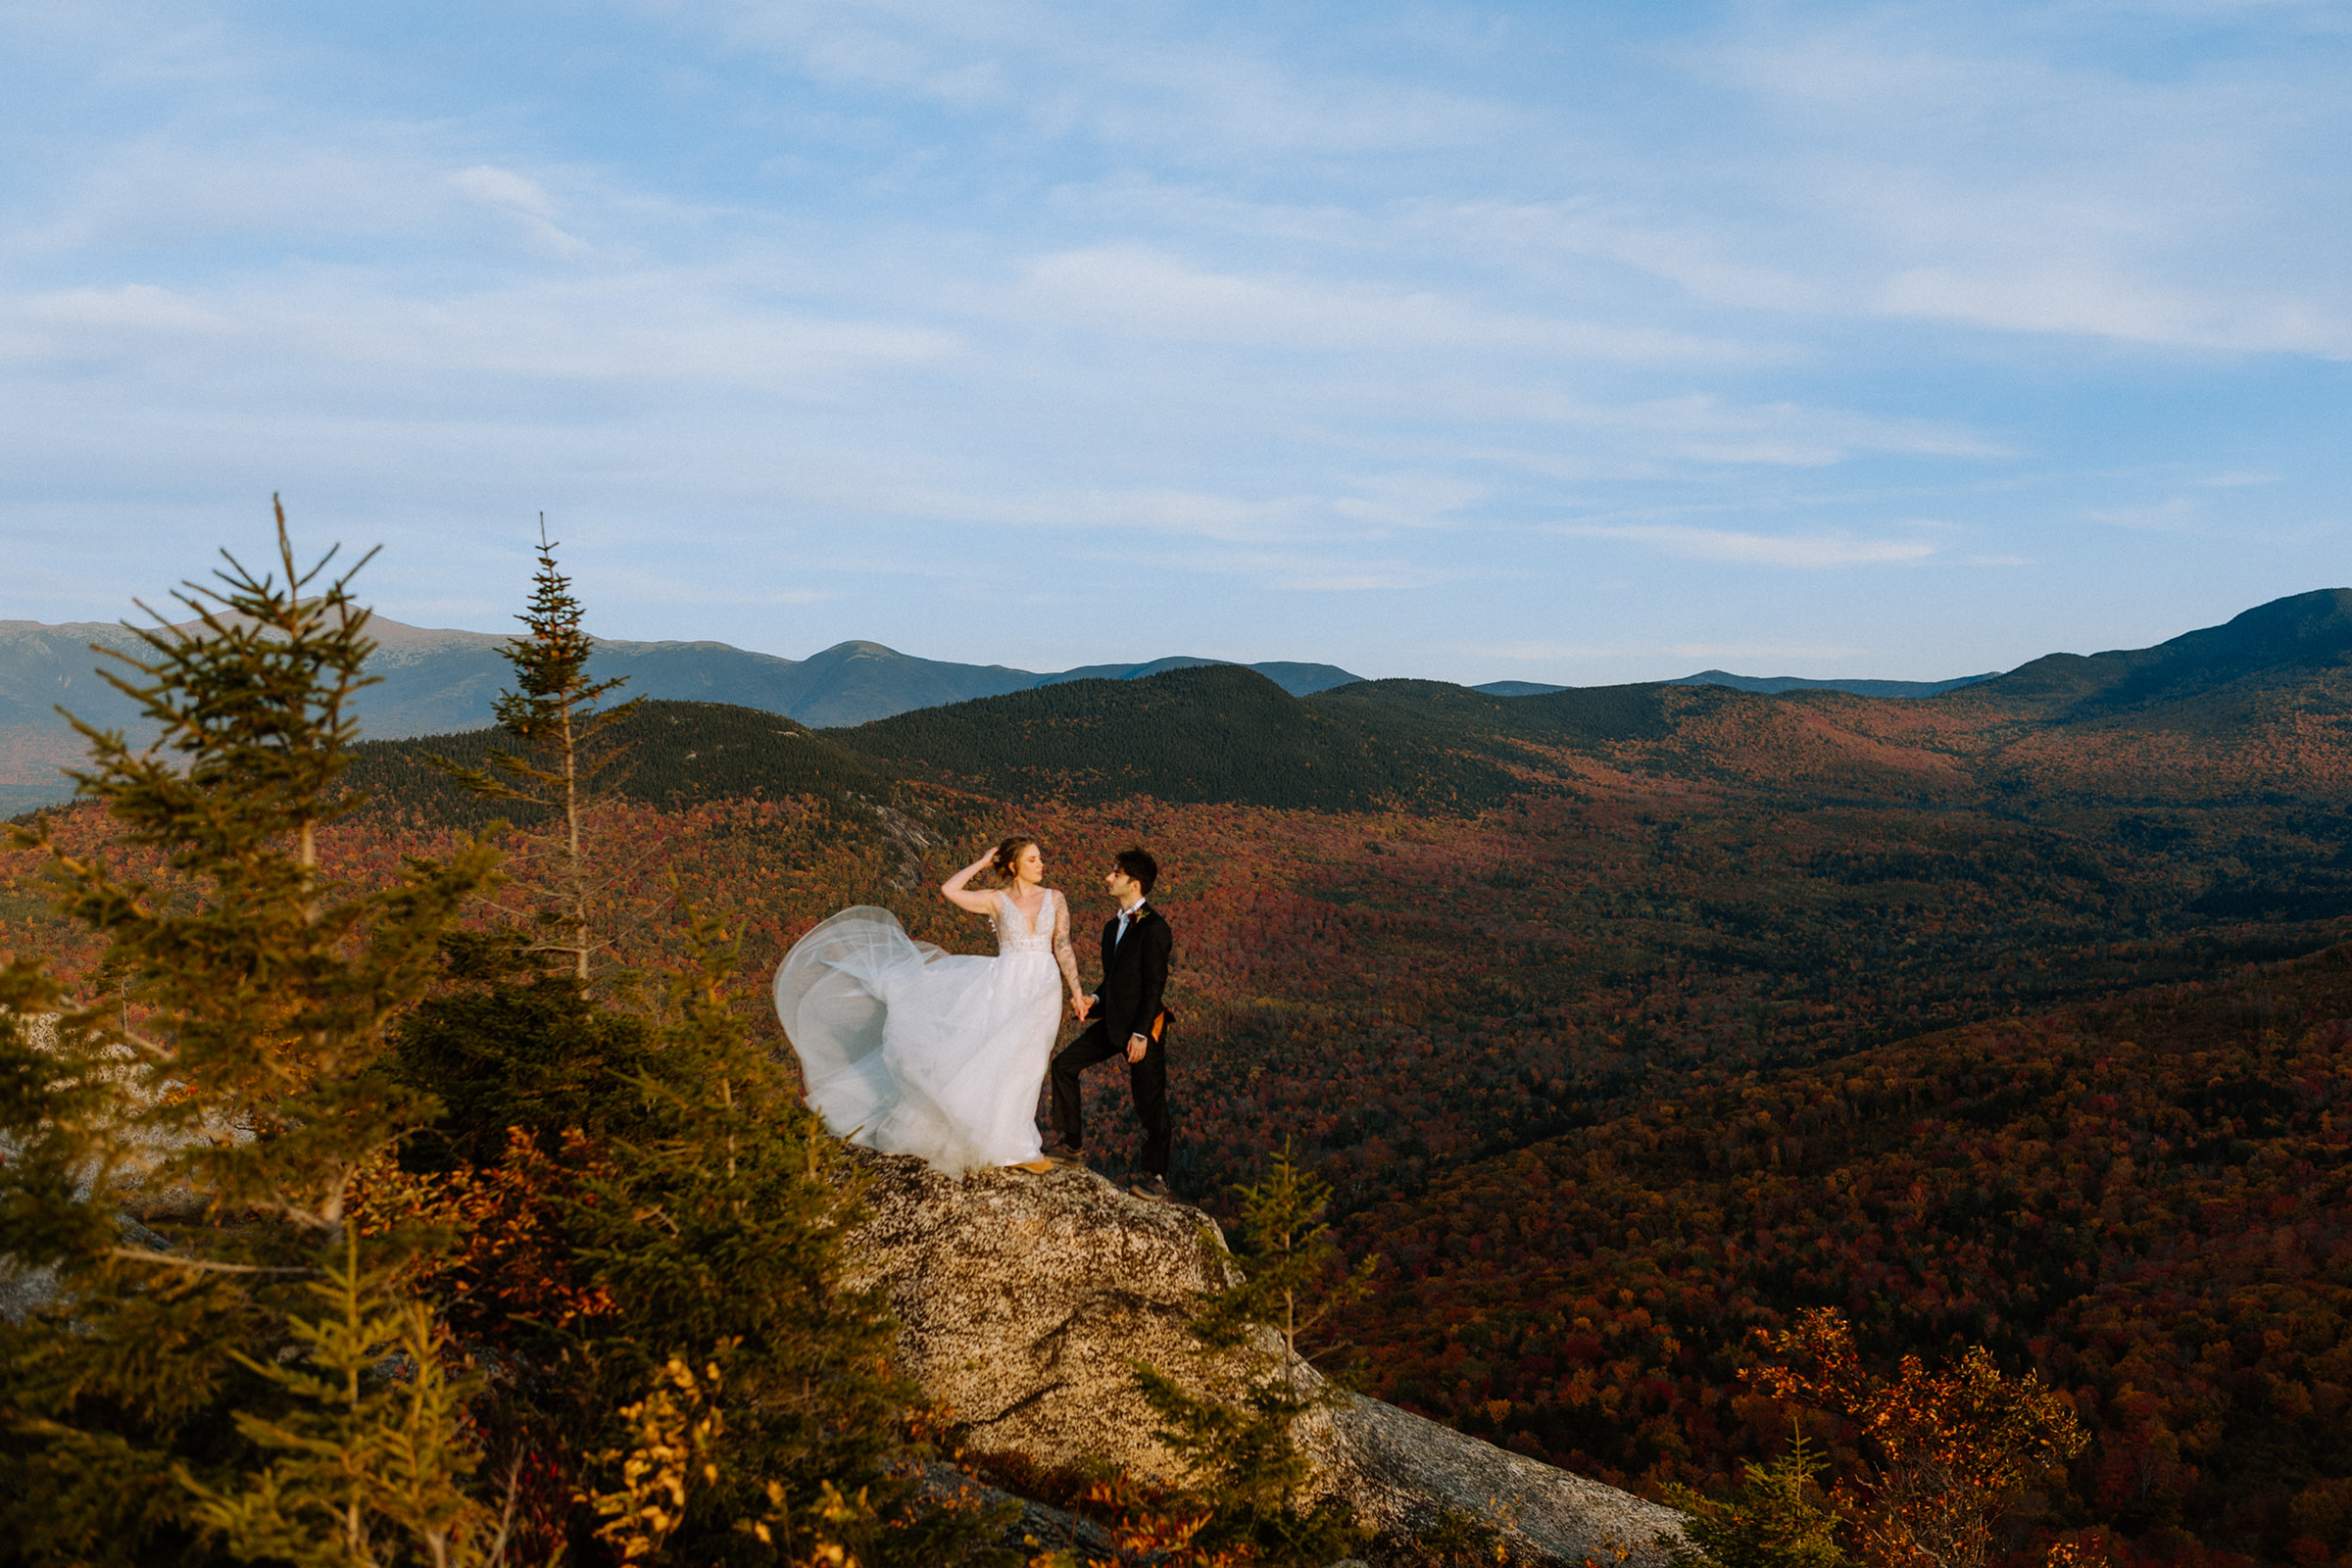 A couple who eloped in the White Mountains say their vows in front of Mount Washington